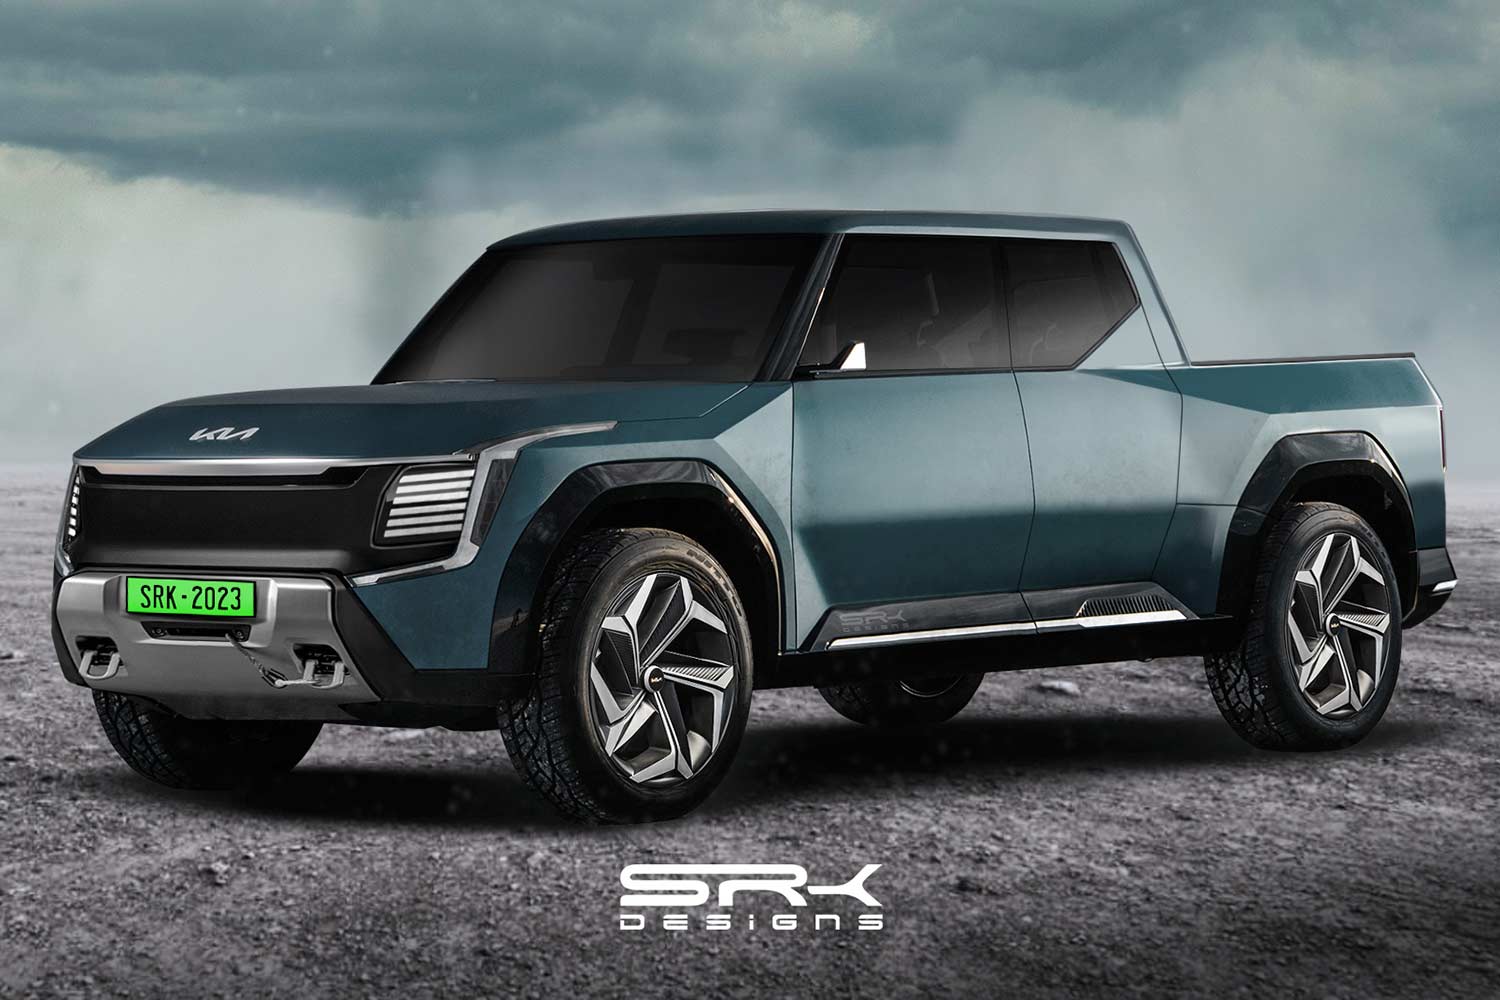 A rendering of the upcoming electric Kia pickup truck